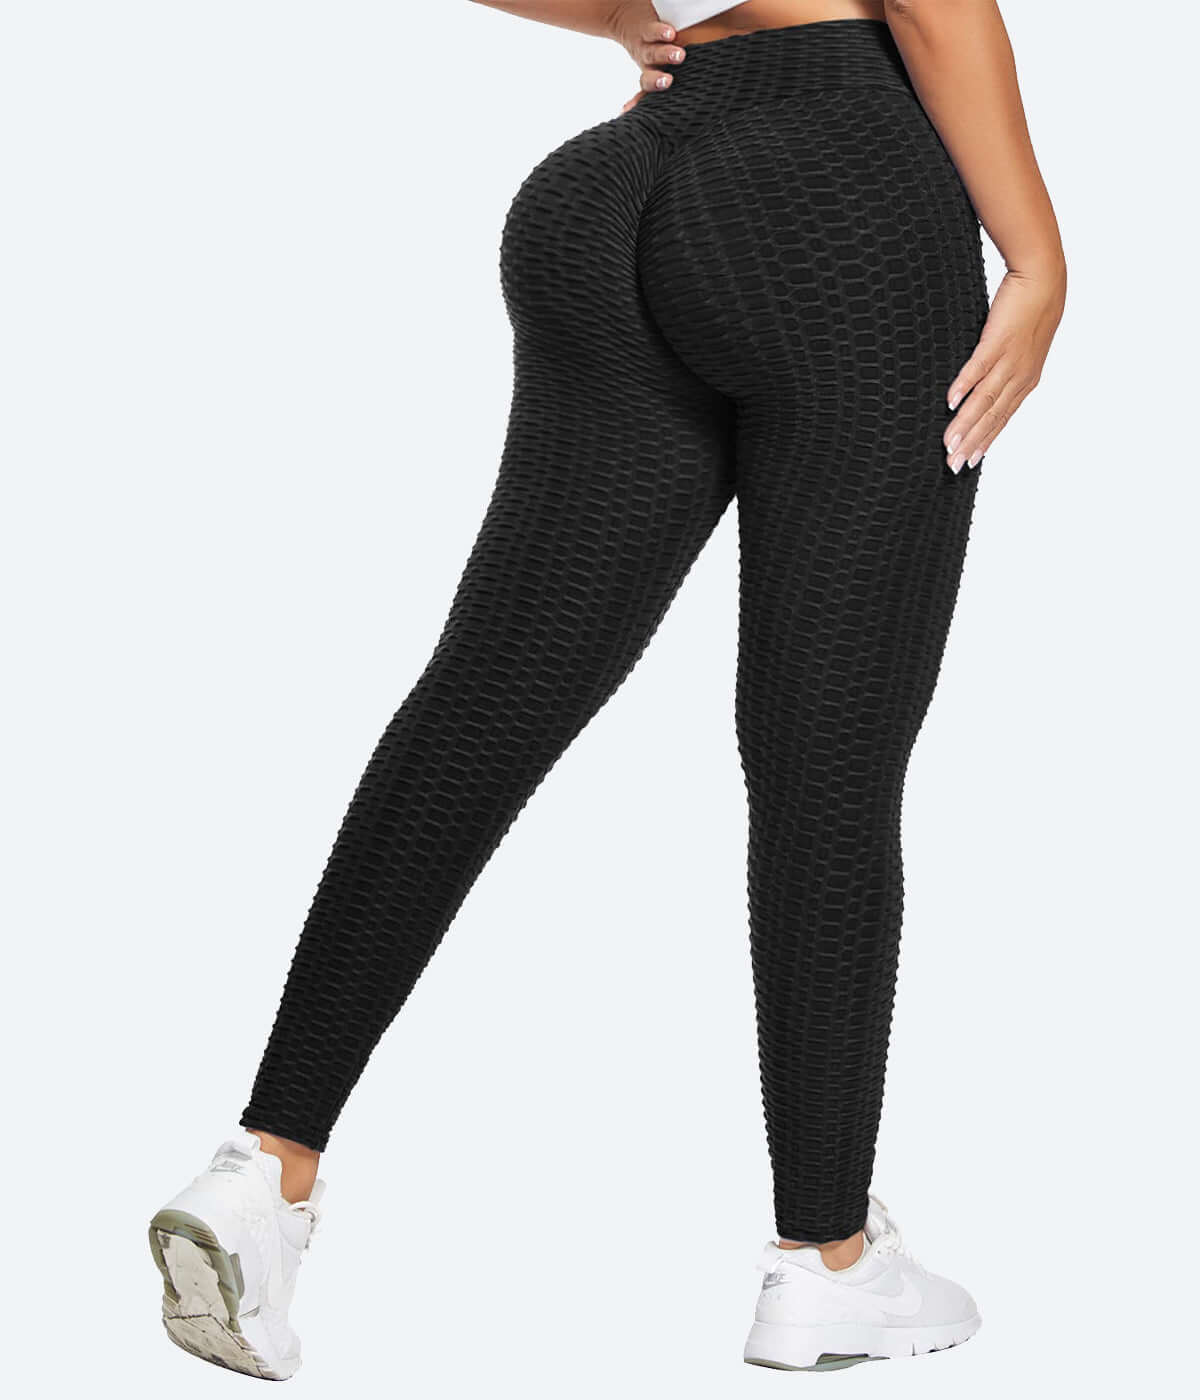 The Heathyoga Bootcut Yoga Pants Are on Sale at  for Just $20